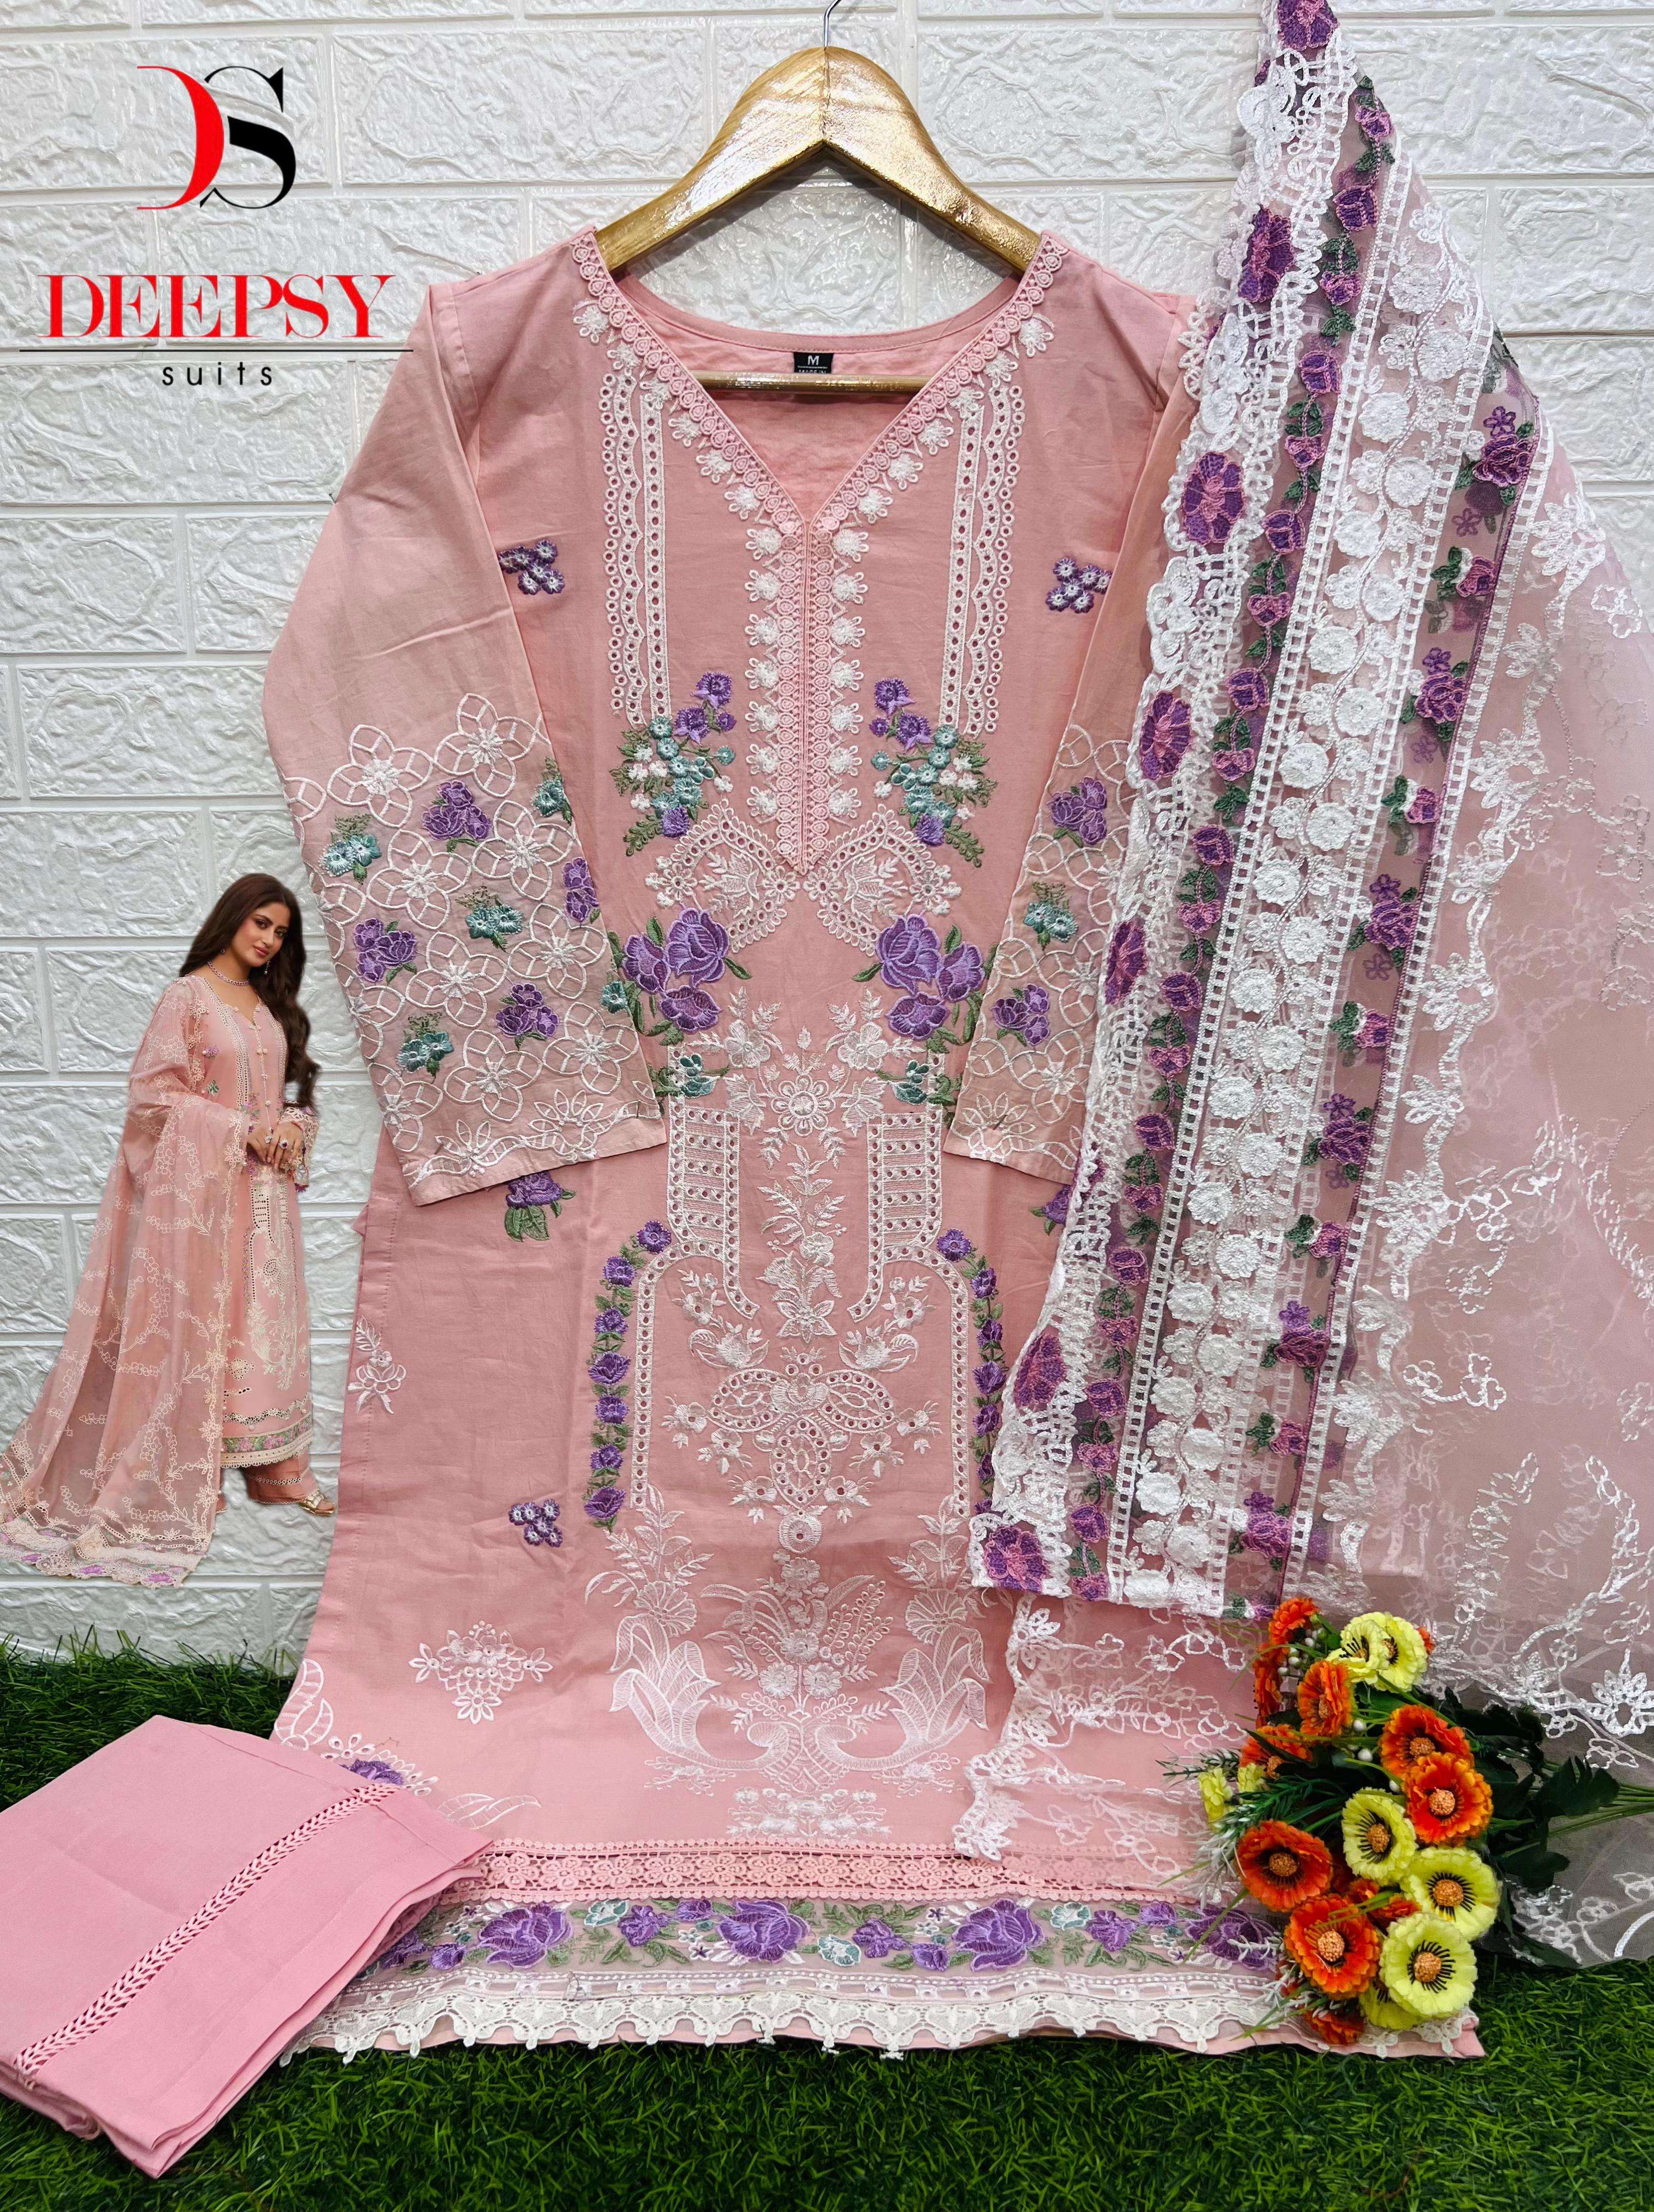 DEEPSY SUITS MARIA B EMBROIDERED LAWN 24 NX 